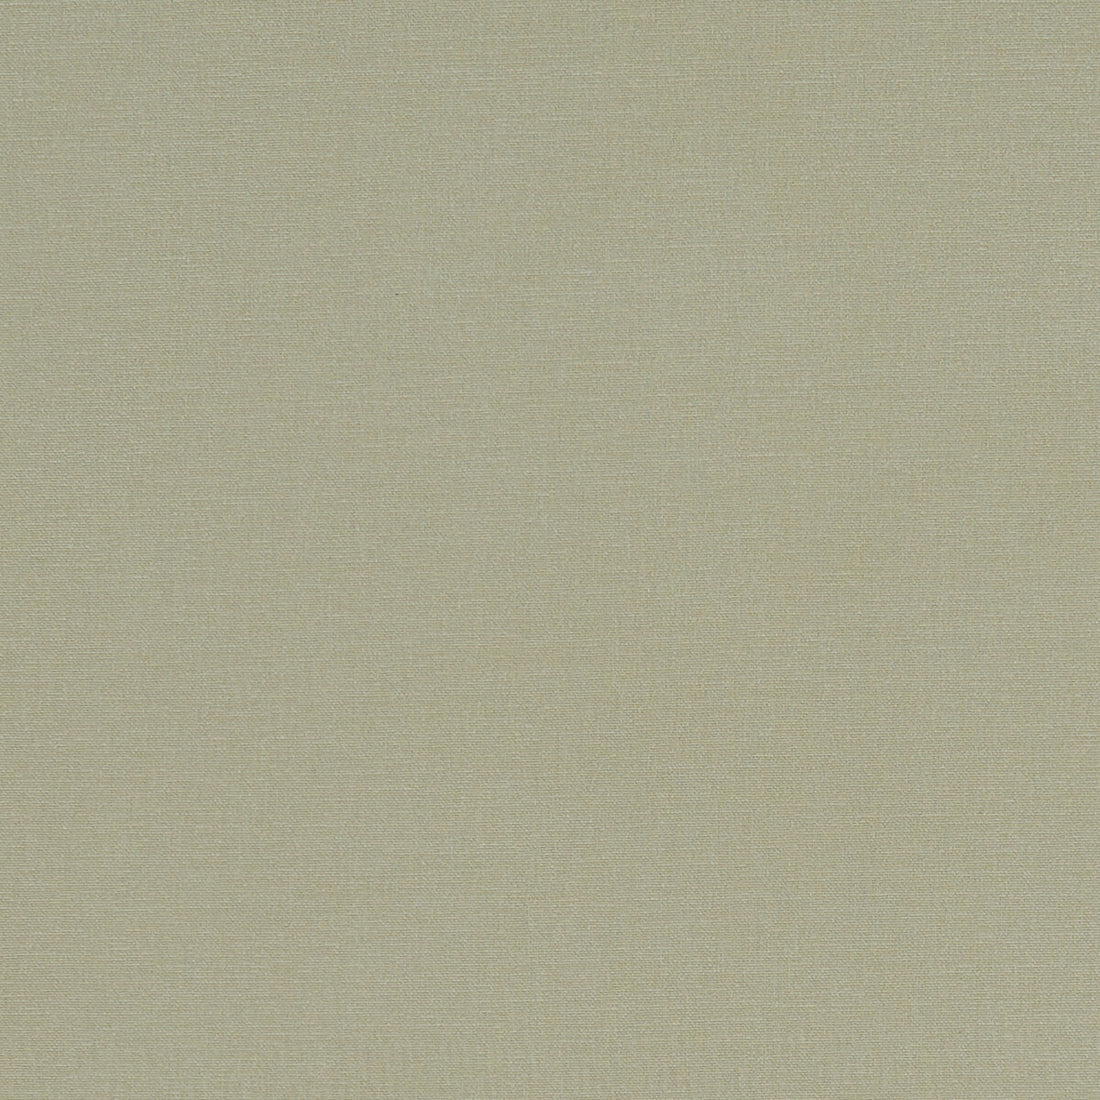 Alora fabric in khaki color - pattern F1097/30.CAC.0 - by Clarke And Clarke in the Alora By Studio G For C&amp;C collection